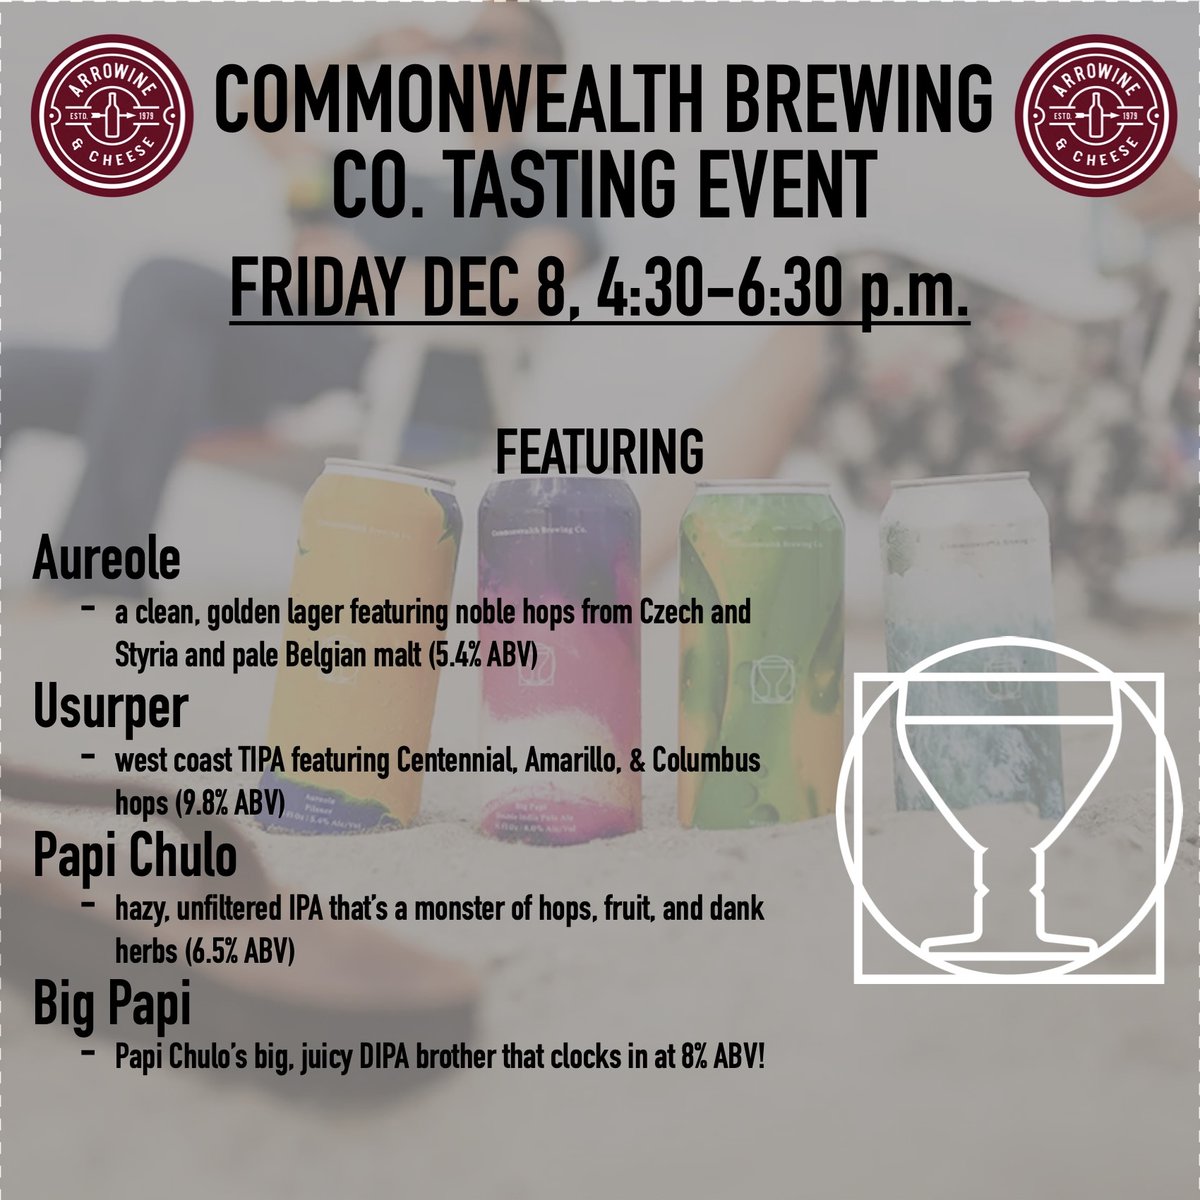 You know what goes well with all the delicious meat we're sampling tomorrow?  BEER!  @CWBrewCo is bringing the beach vibes this holiday and Arrowine is the place to catch 'em!